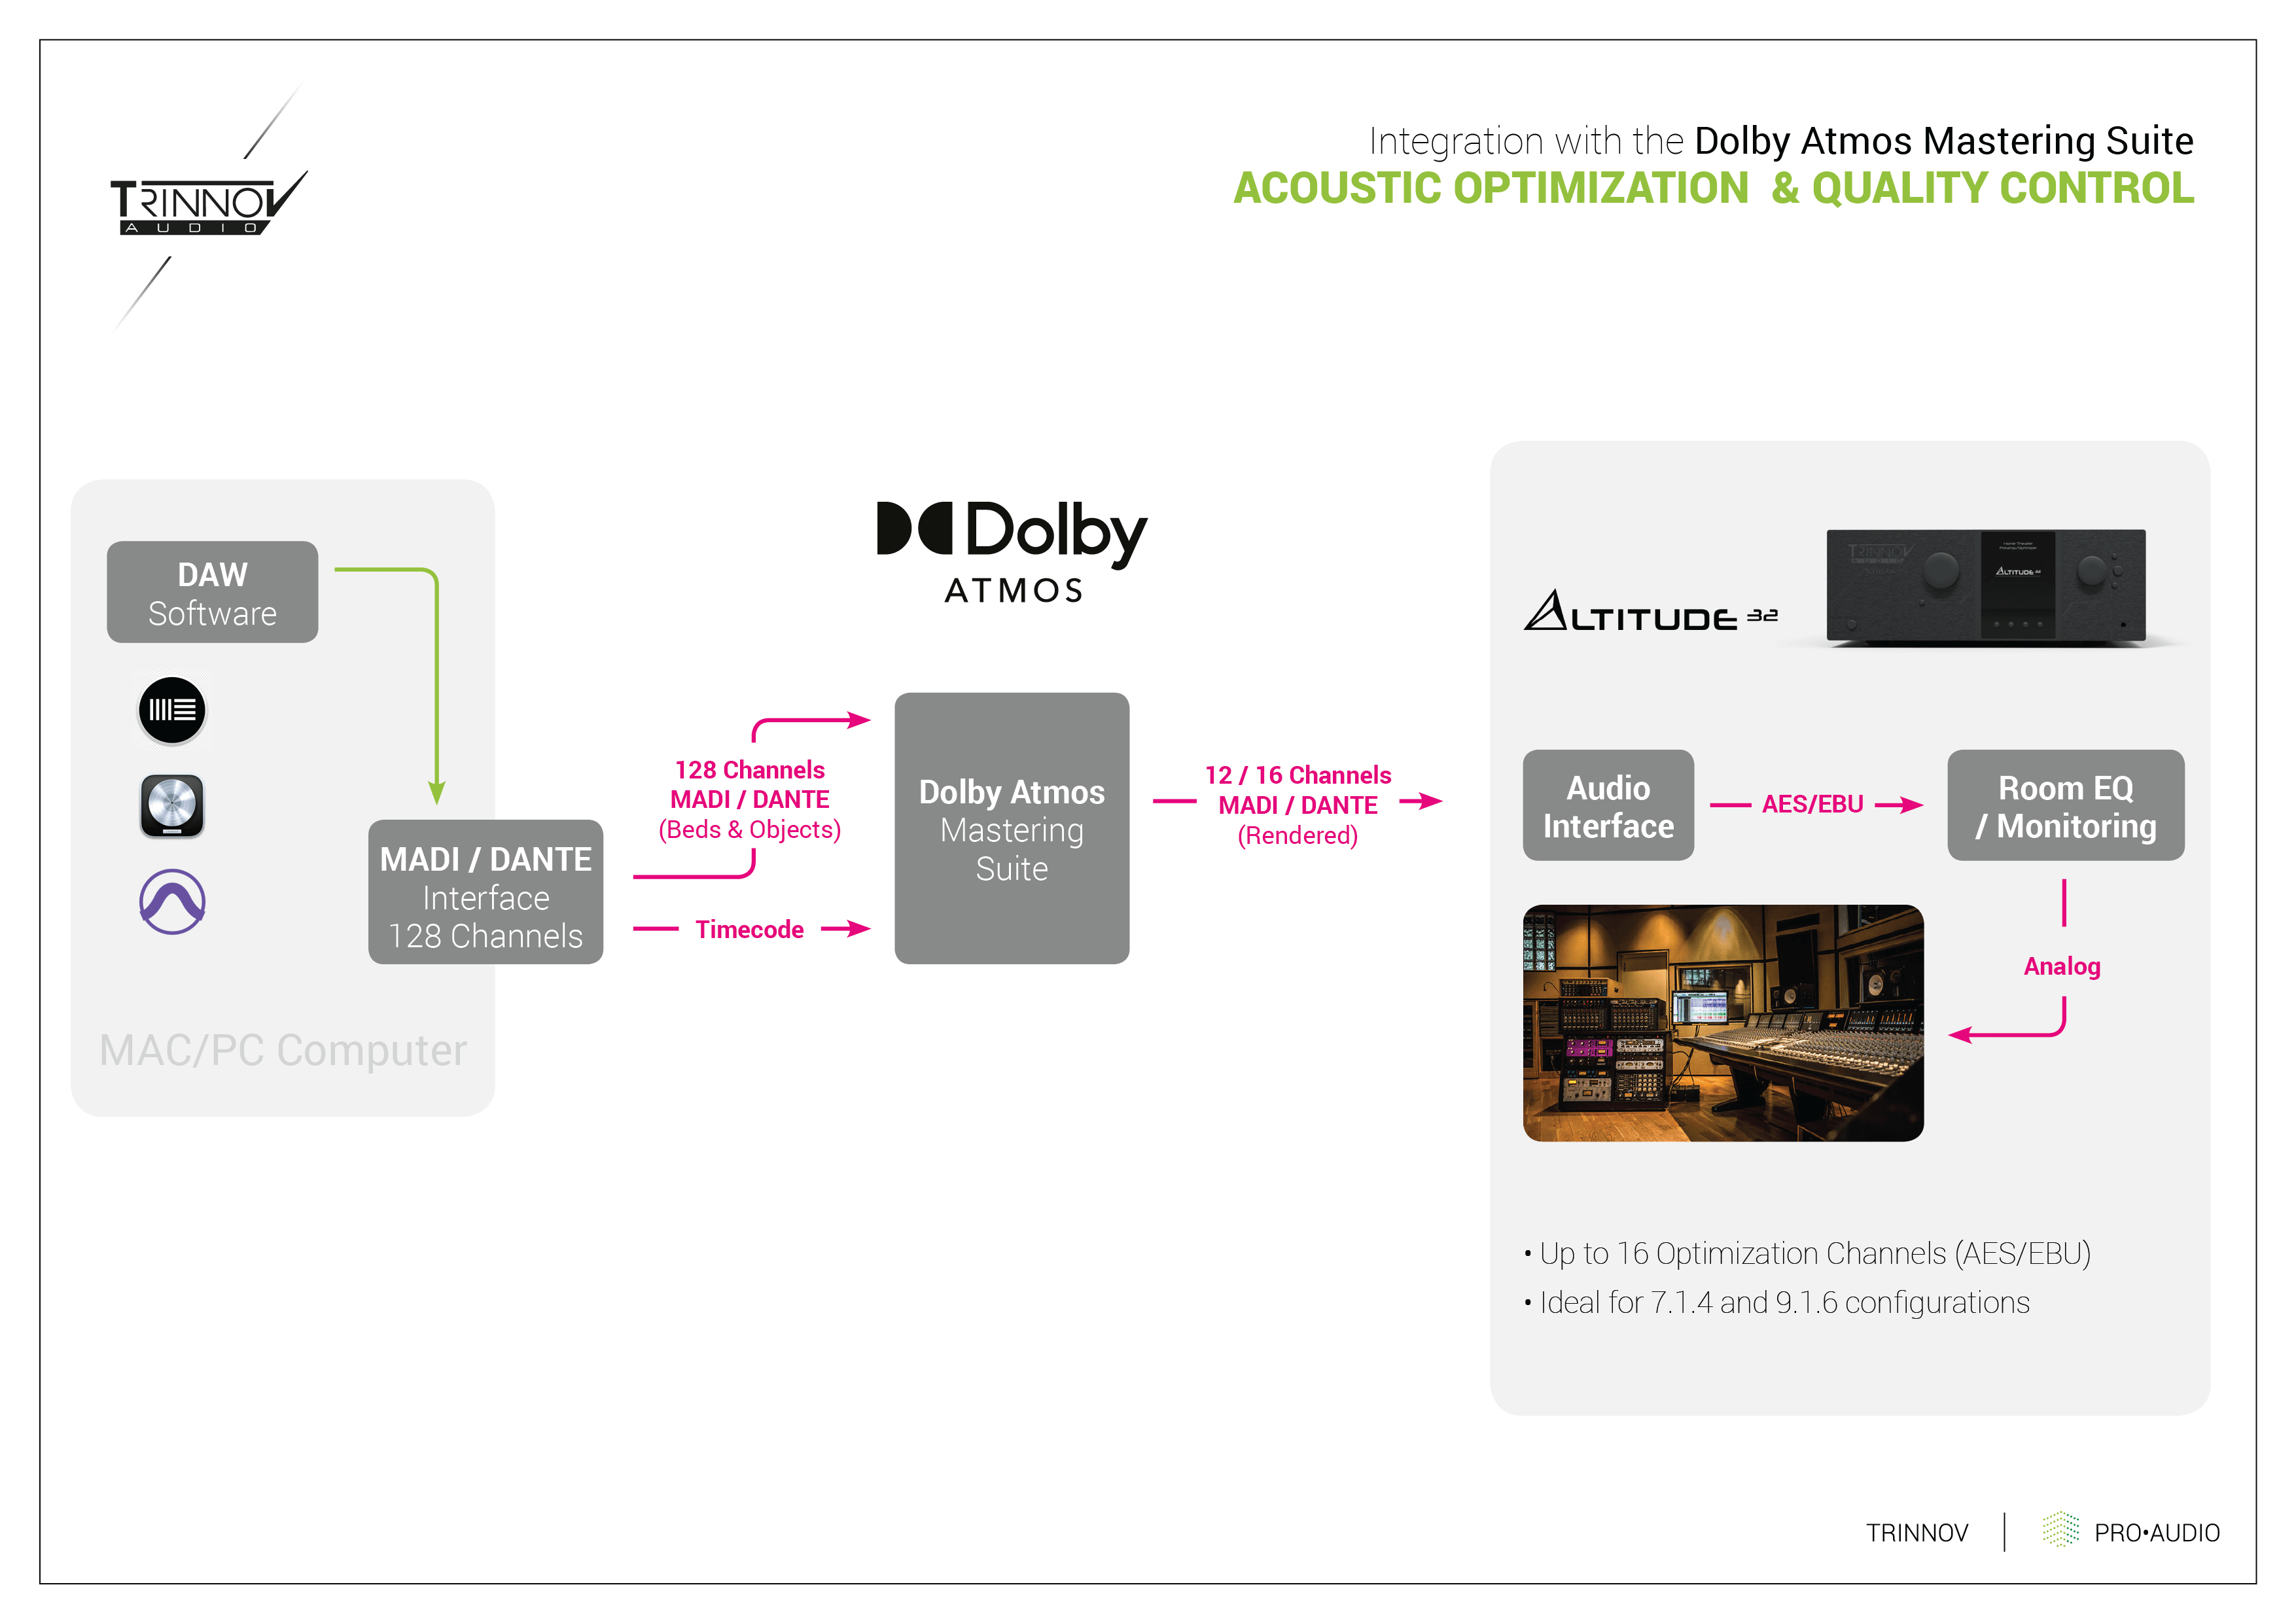 Dolby Atmos 128 Channels of Audio